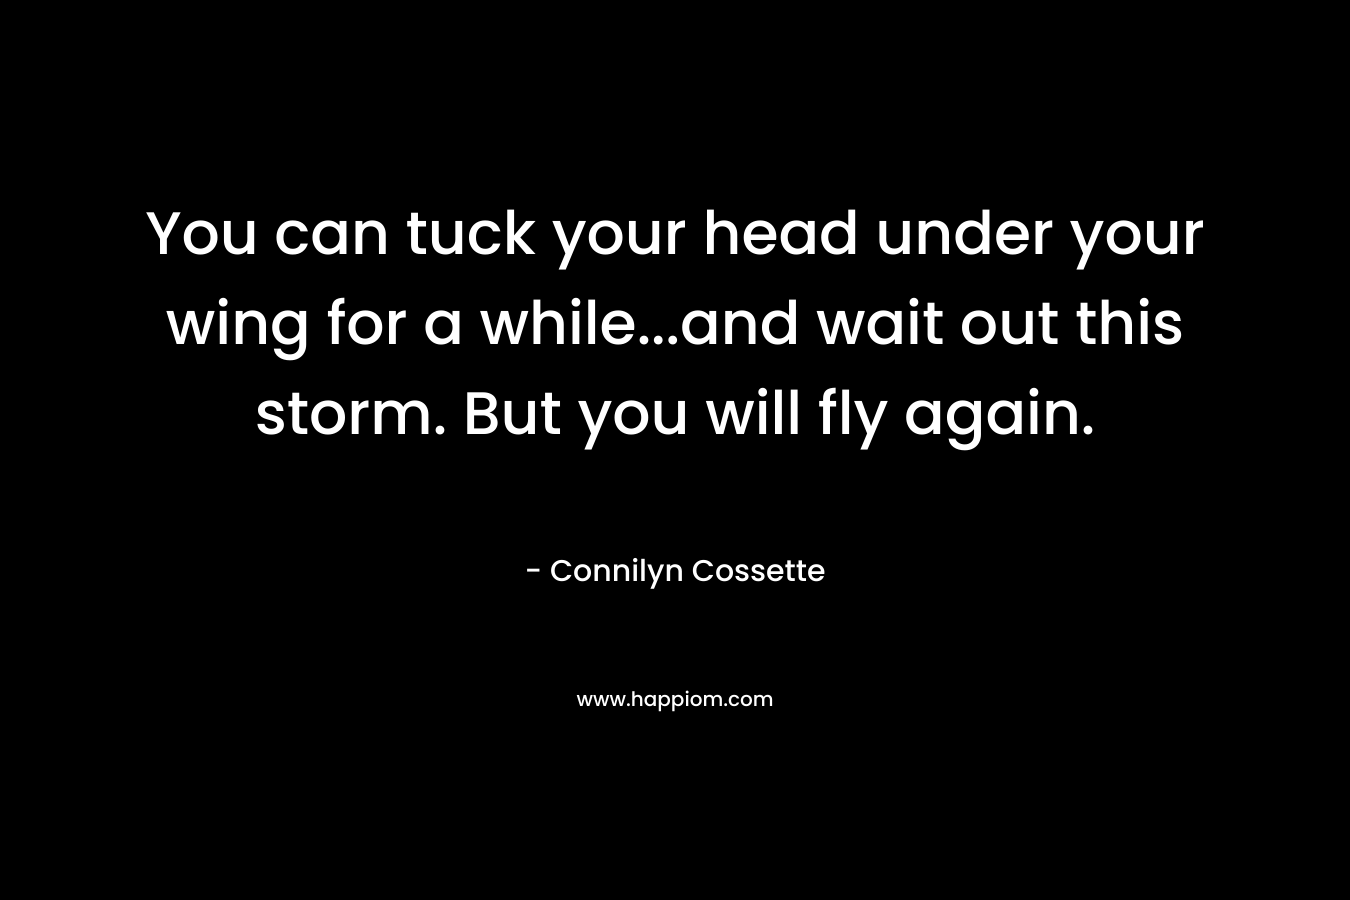 You can tuck your head under your wing for a while…and wait out this storm. But you will fly again. – Connilyn Cossette